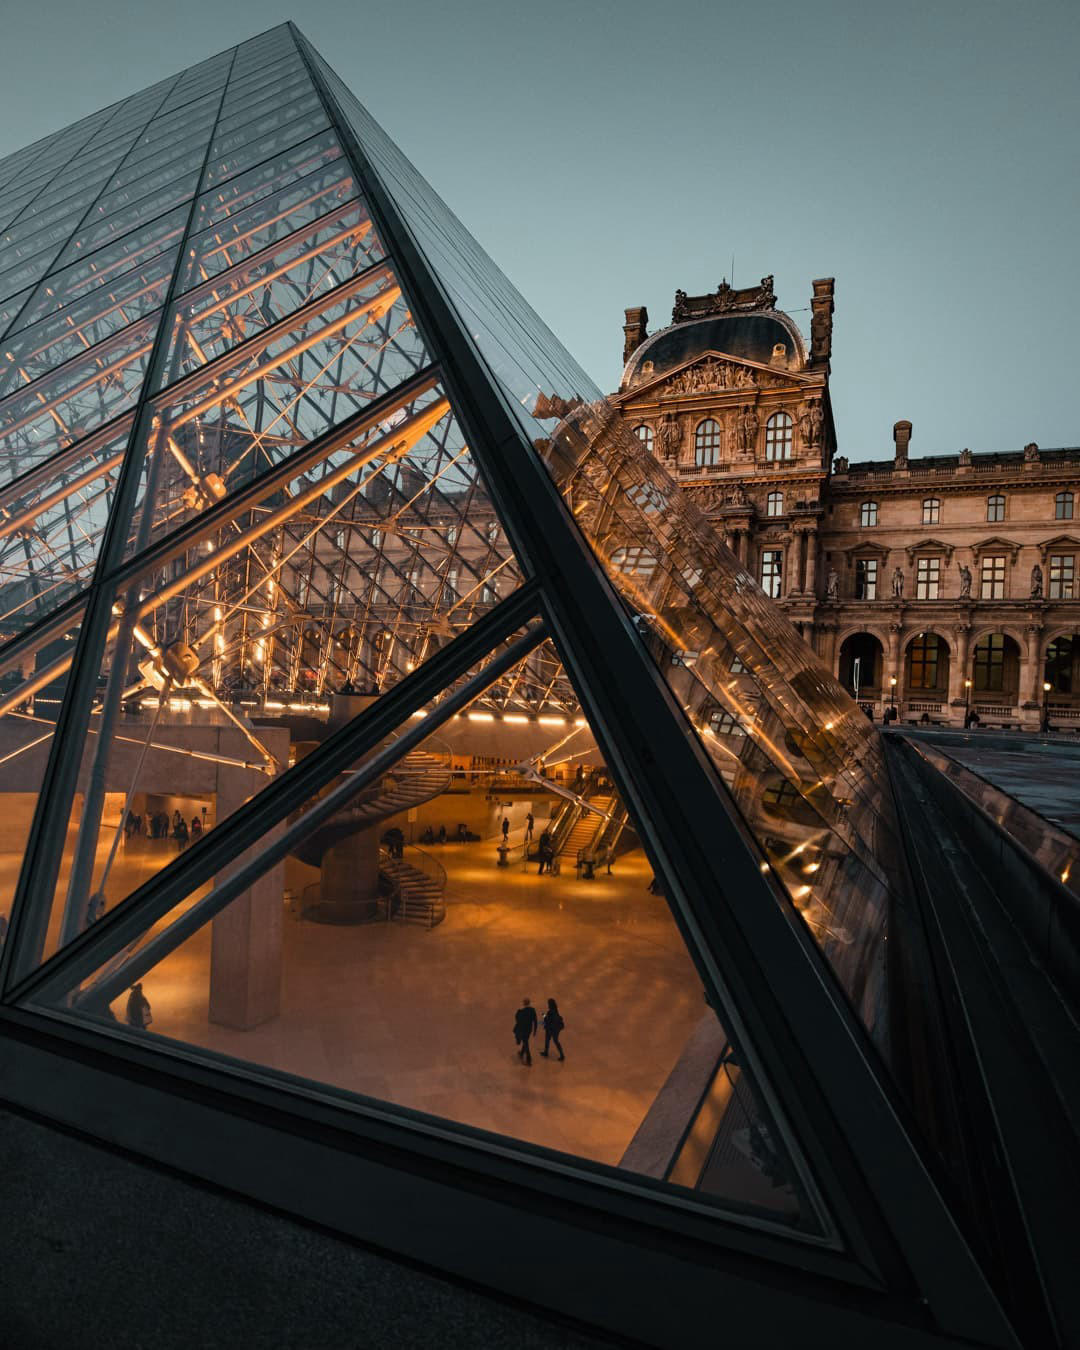 The #museelouvre welcomes visitors for a free night opening every 1st Friday of the month, from 6pm